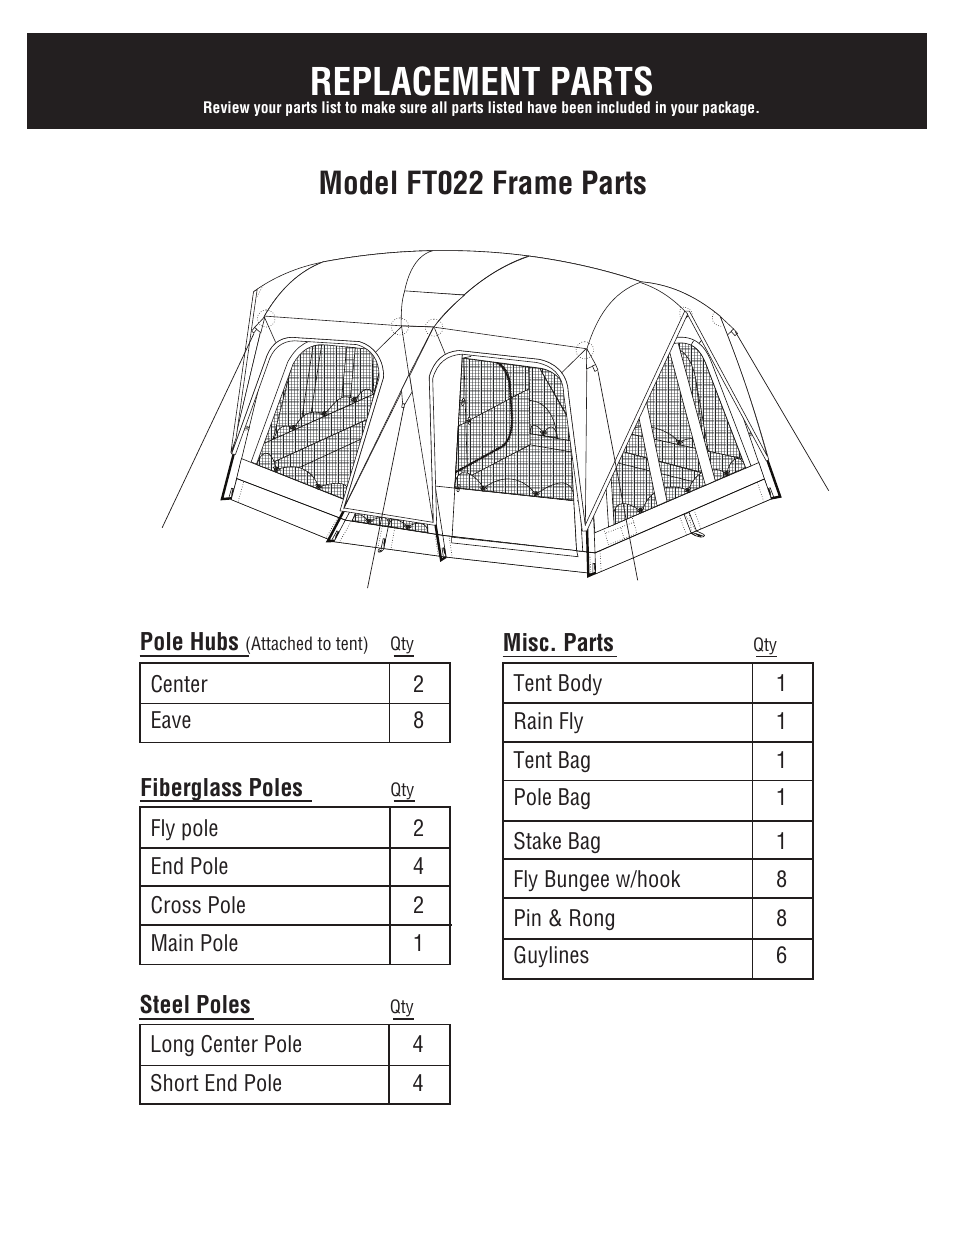 Replacement parts, Model ft022 frame parts | Giga Tent FT 022 User Manual | Page 4 / 8